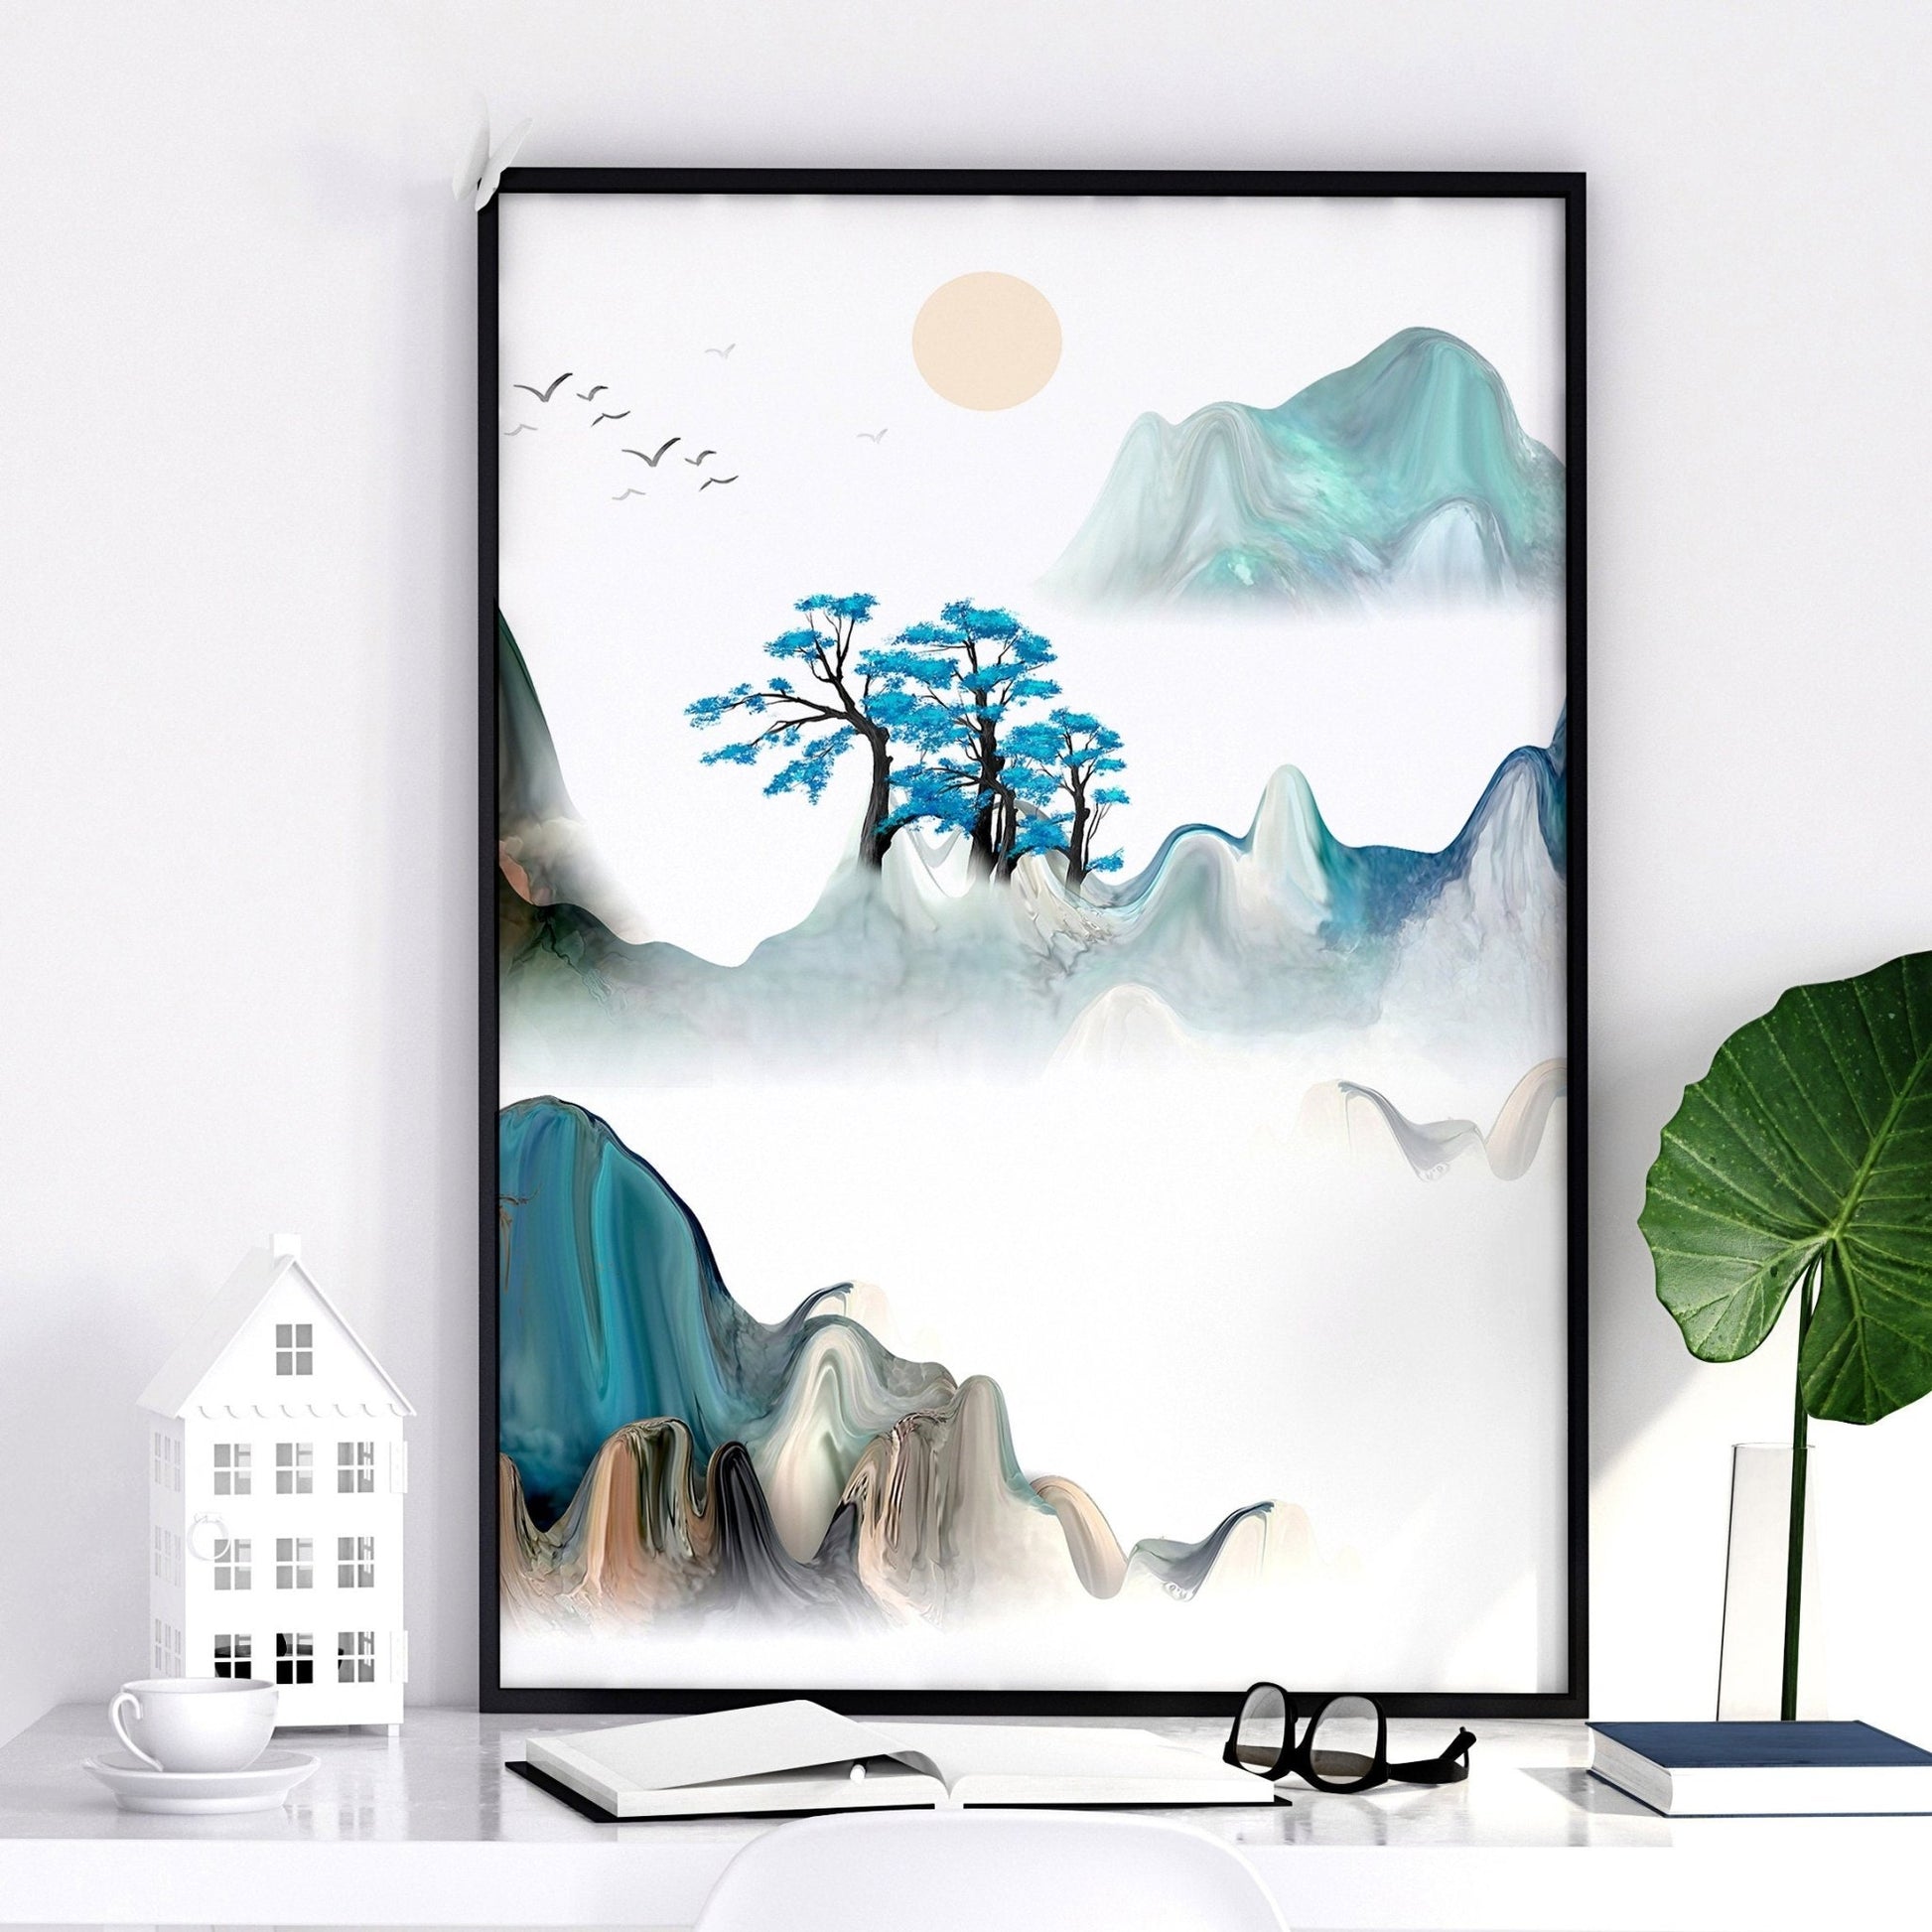 Japanese style decor | set of 3 wall art prints for living room - About Wall Art